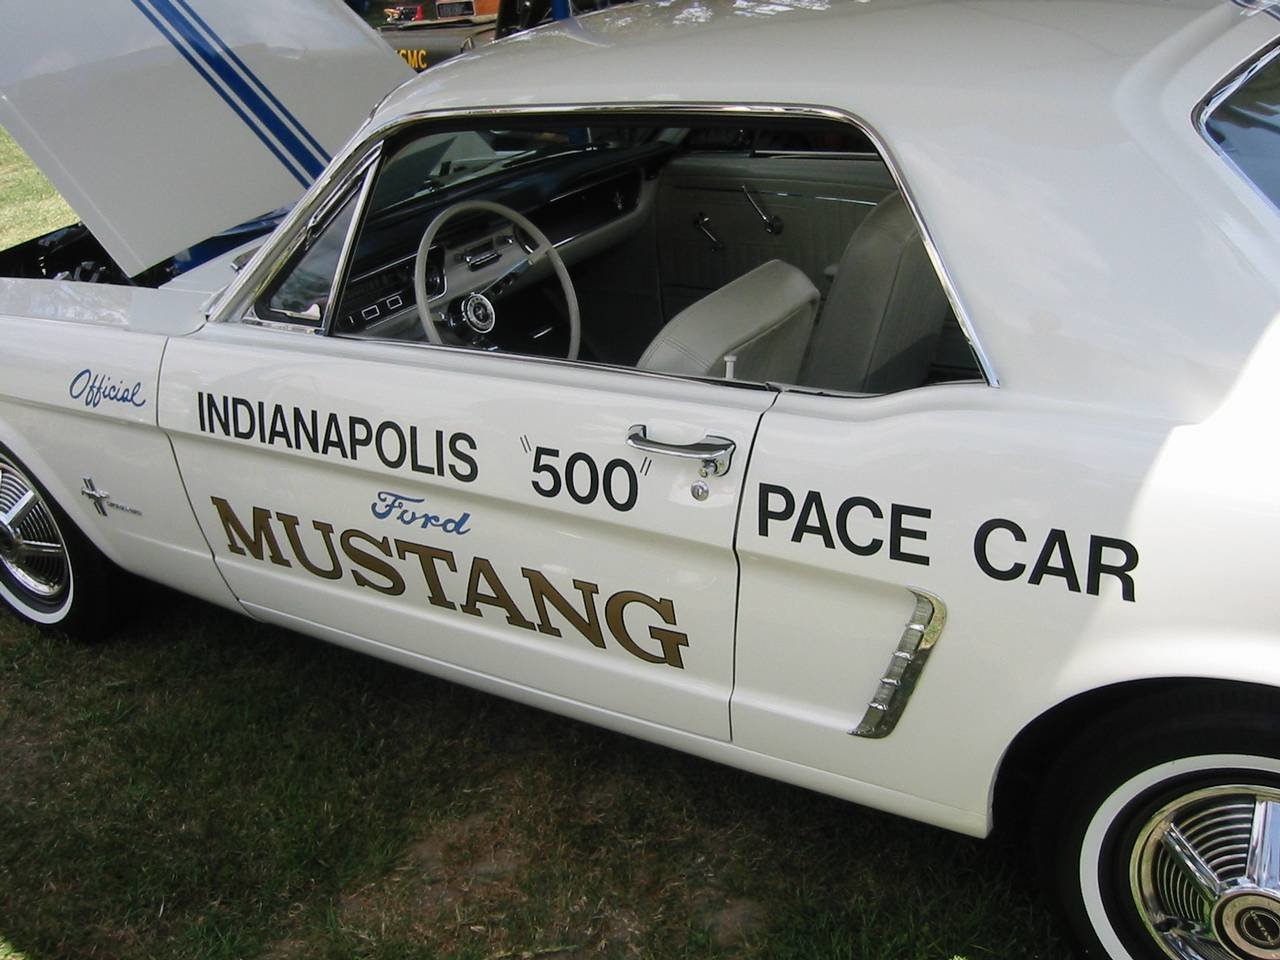 1964 1/2 Indy 500 Pacecar